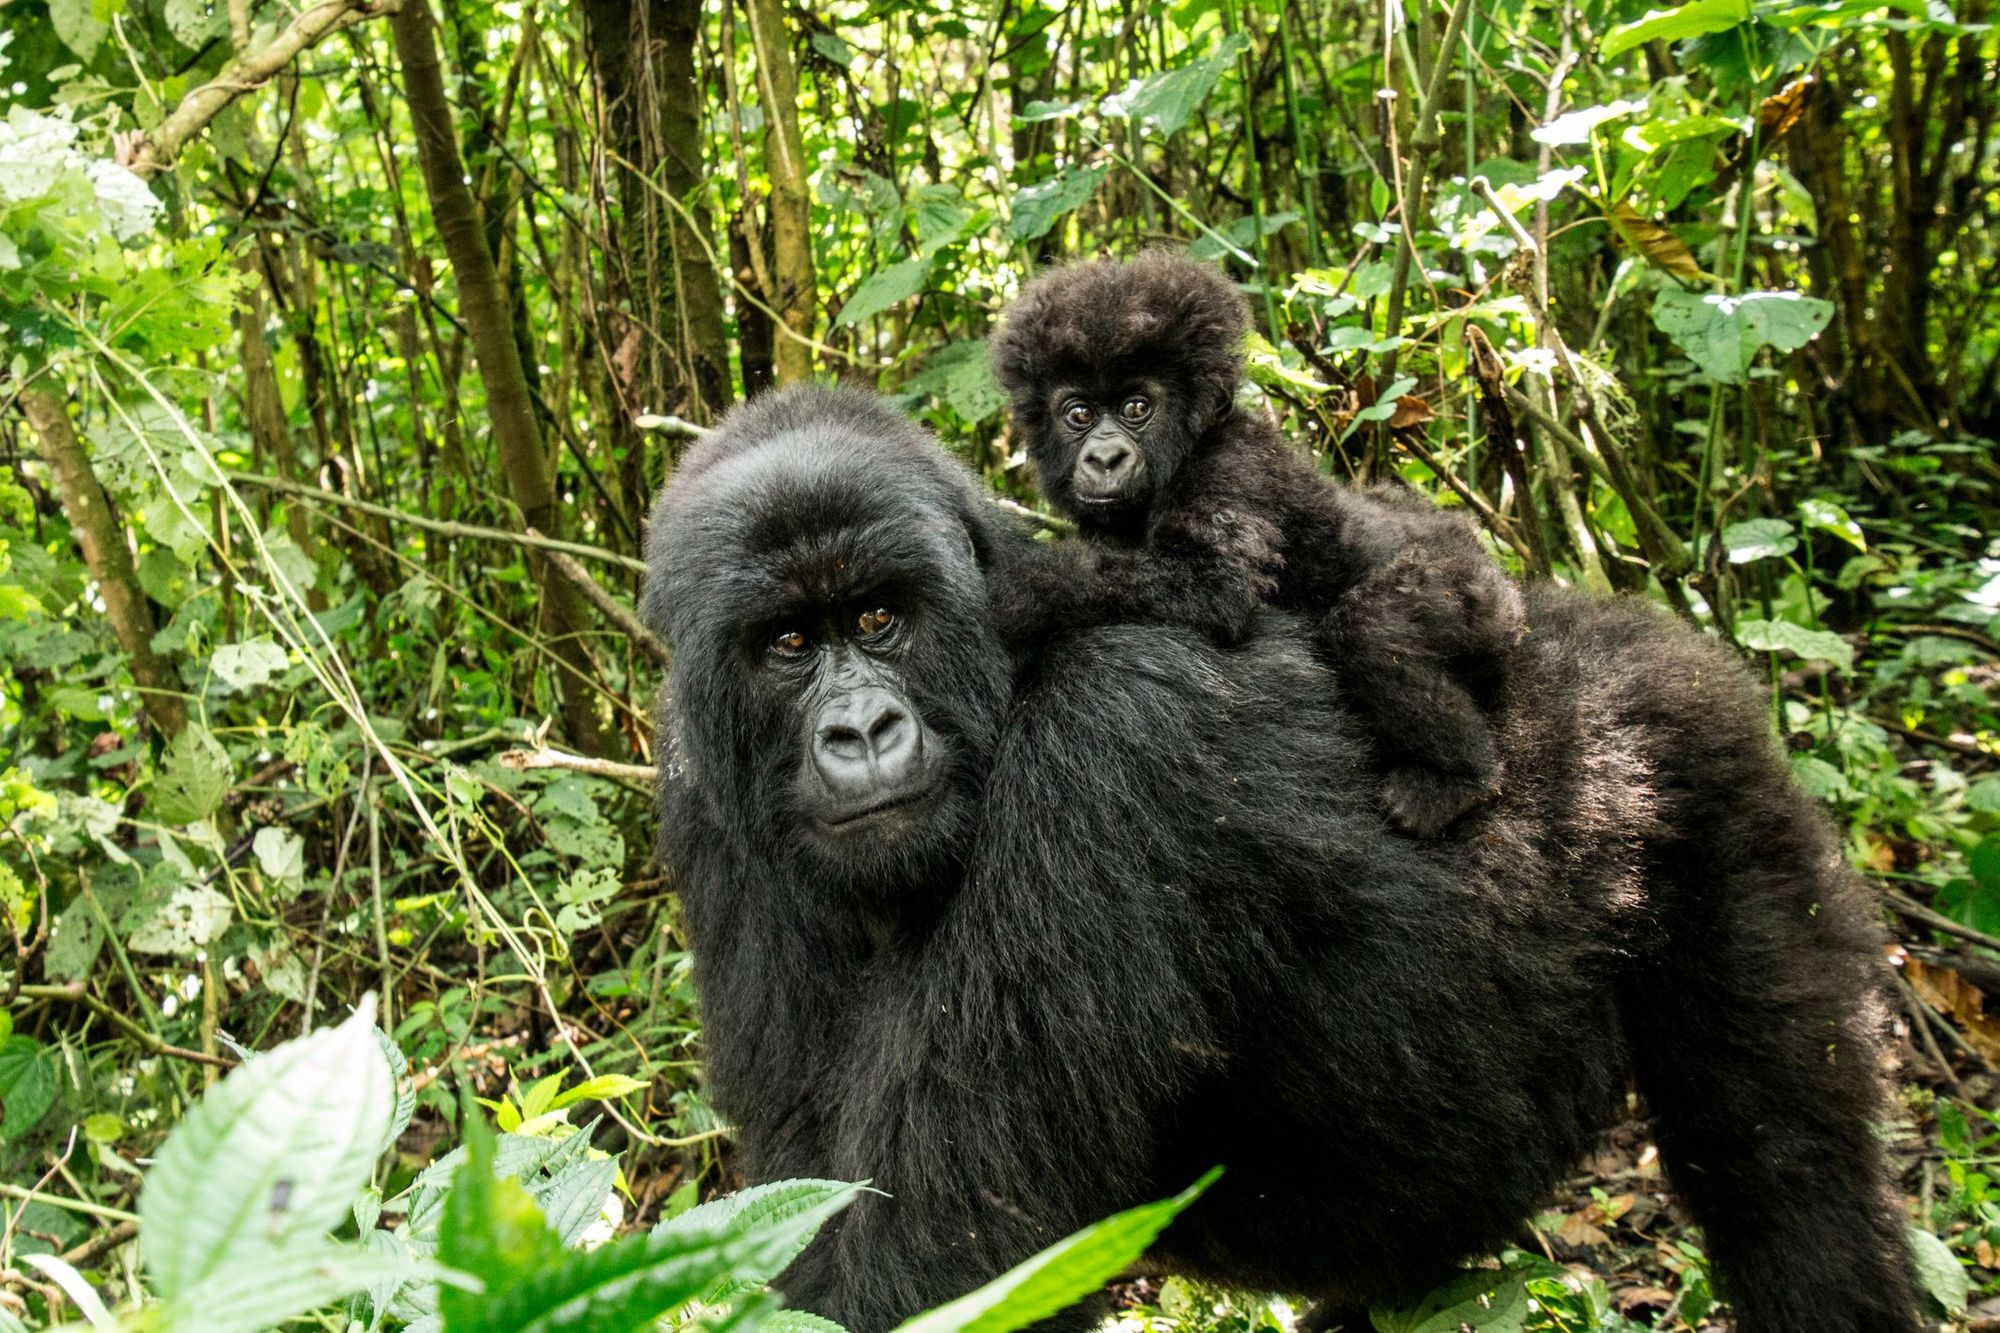 A baby gorilla hitches a ride on its mother's back in Virunga National Park